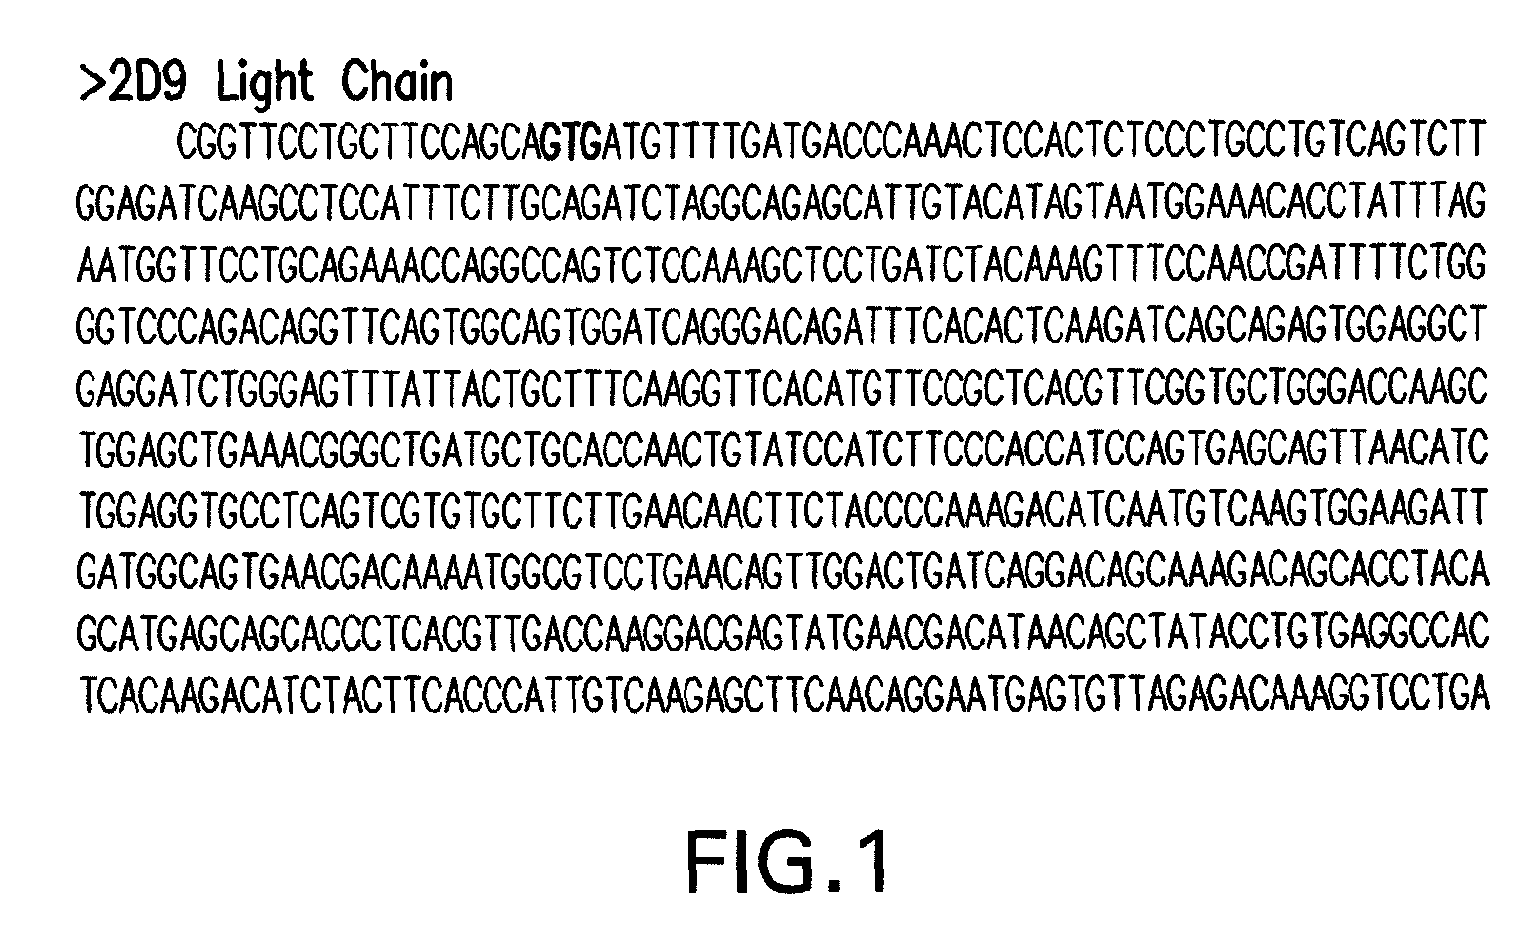 Compositions and methods for early pregnancy diagnosis